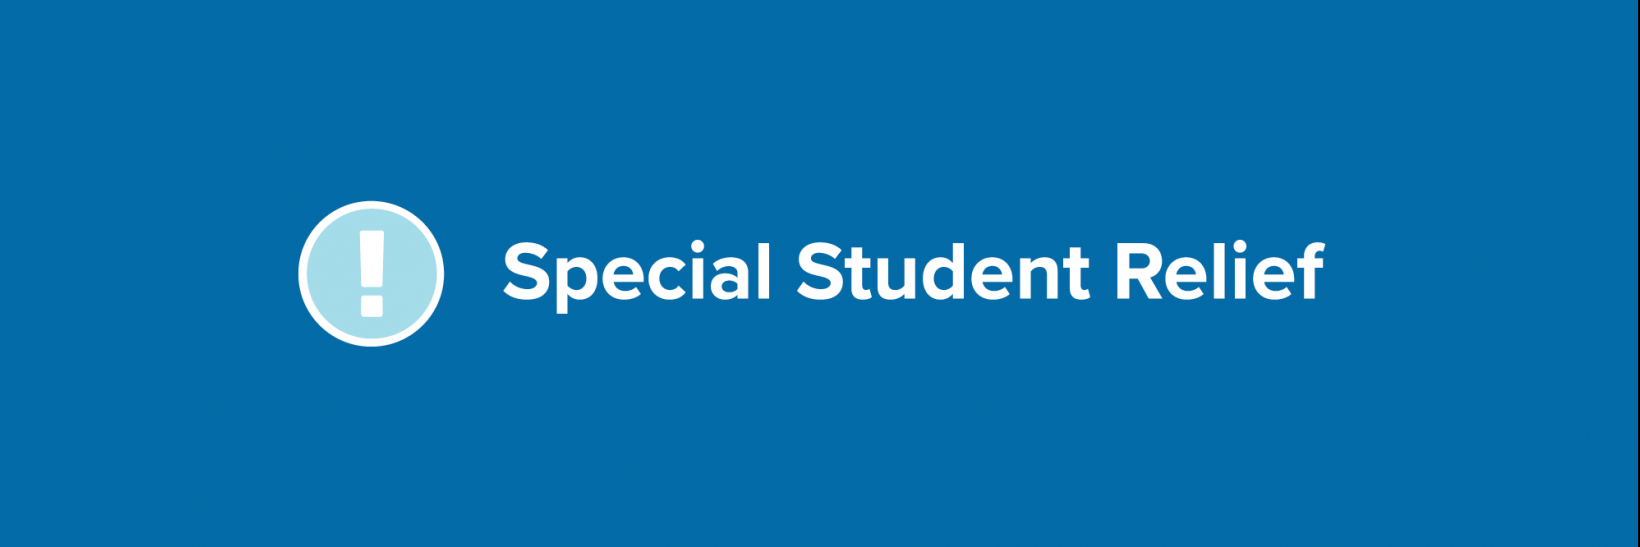 Exclamation point with text 'Special Student Relief'